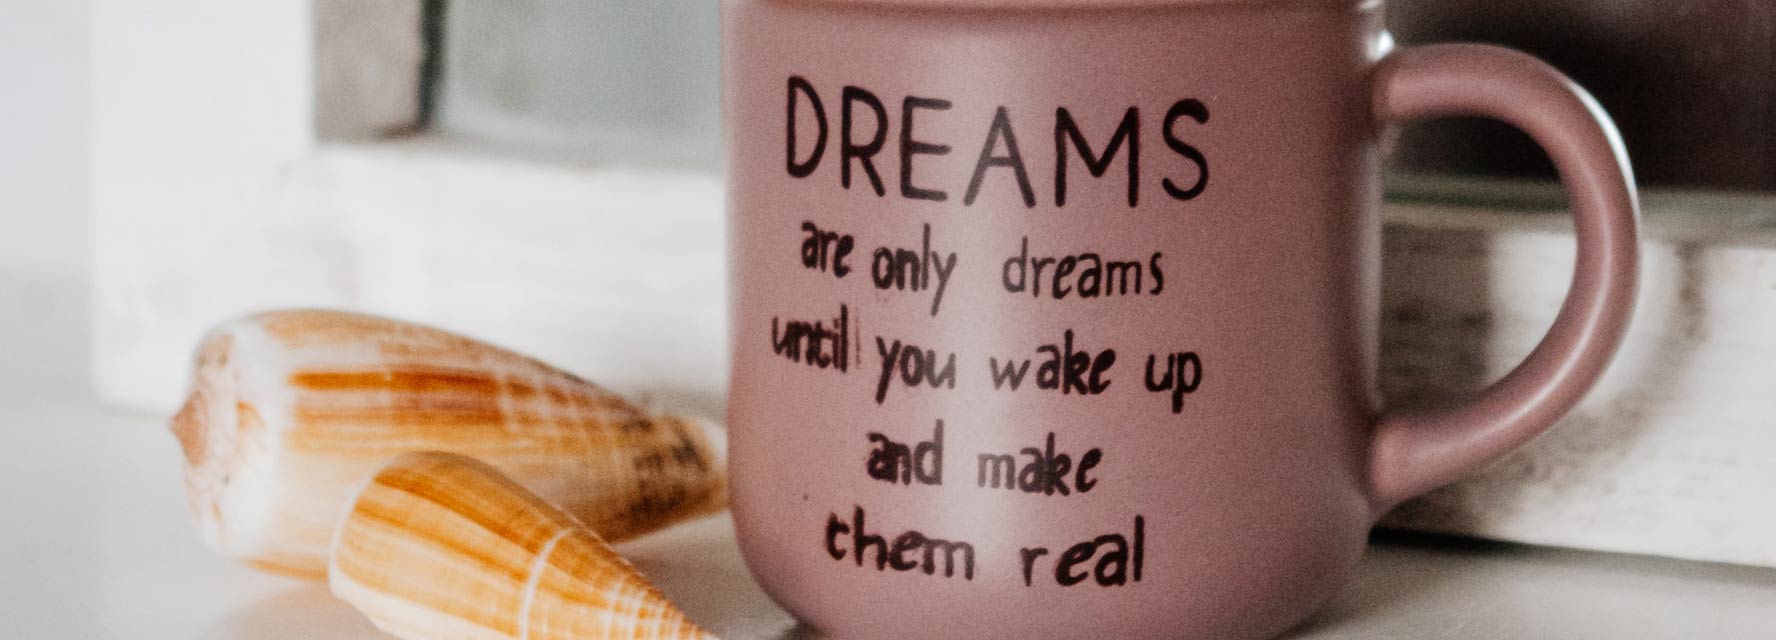 Photo of a coffee mug that has an inspirational quote on it, sayin Dreams are only dreams until you wake up and make them real